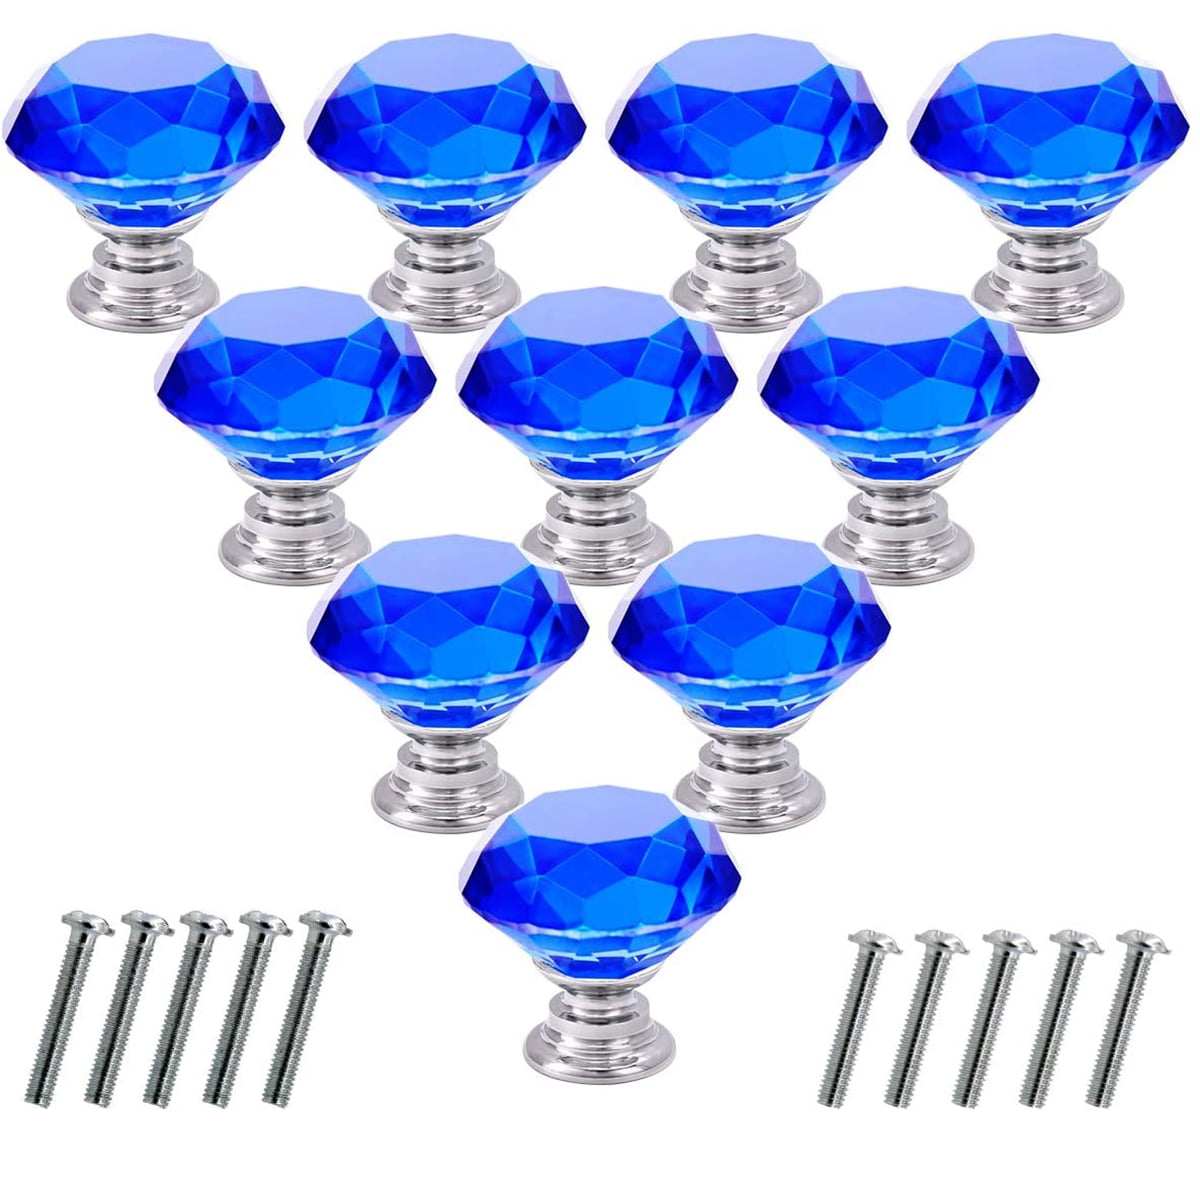 10x 30mm Blue Clear Crystal Glass Door Knobs Drawer Cabinet Kitchen Handles 